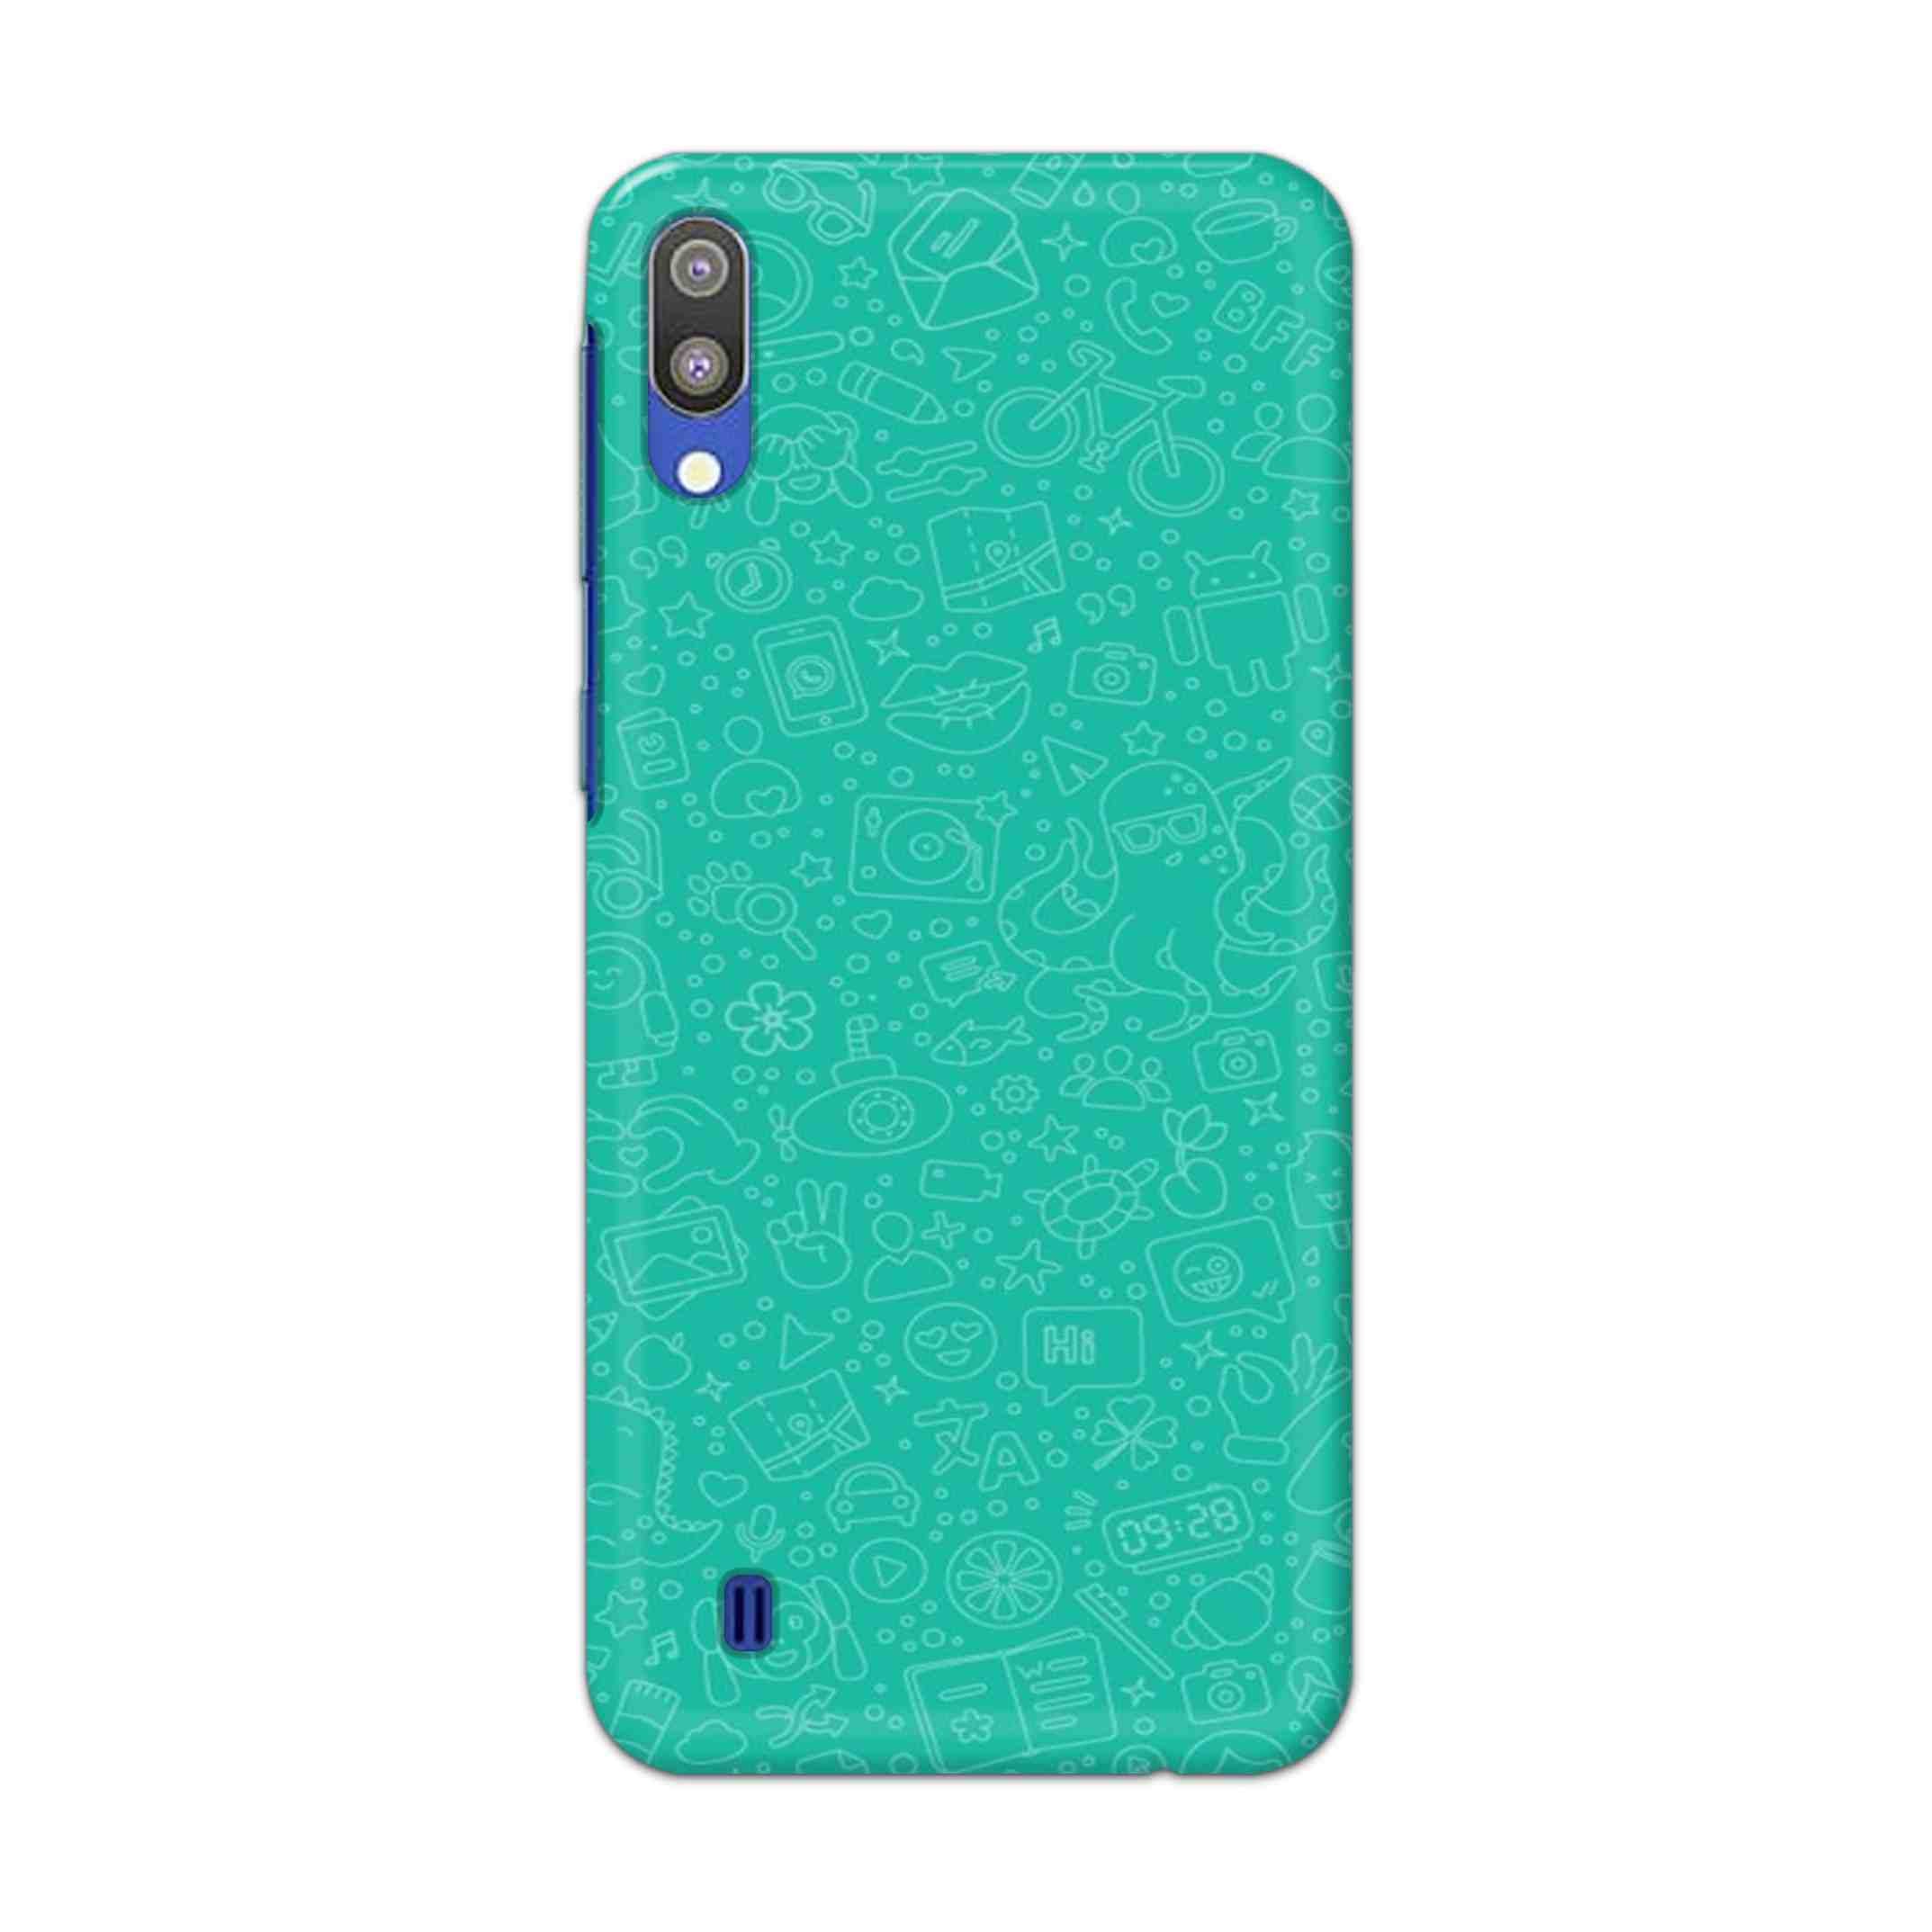 Buy Whatsapp Hard Back Mobile Phone Case Cover For Samsung Galaxy M10 Online